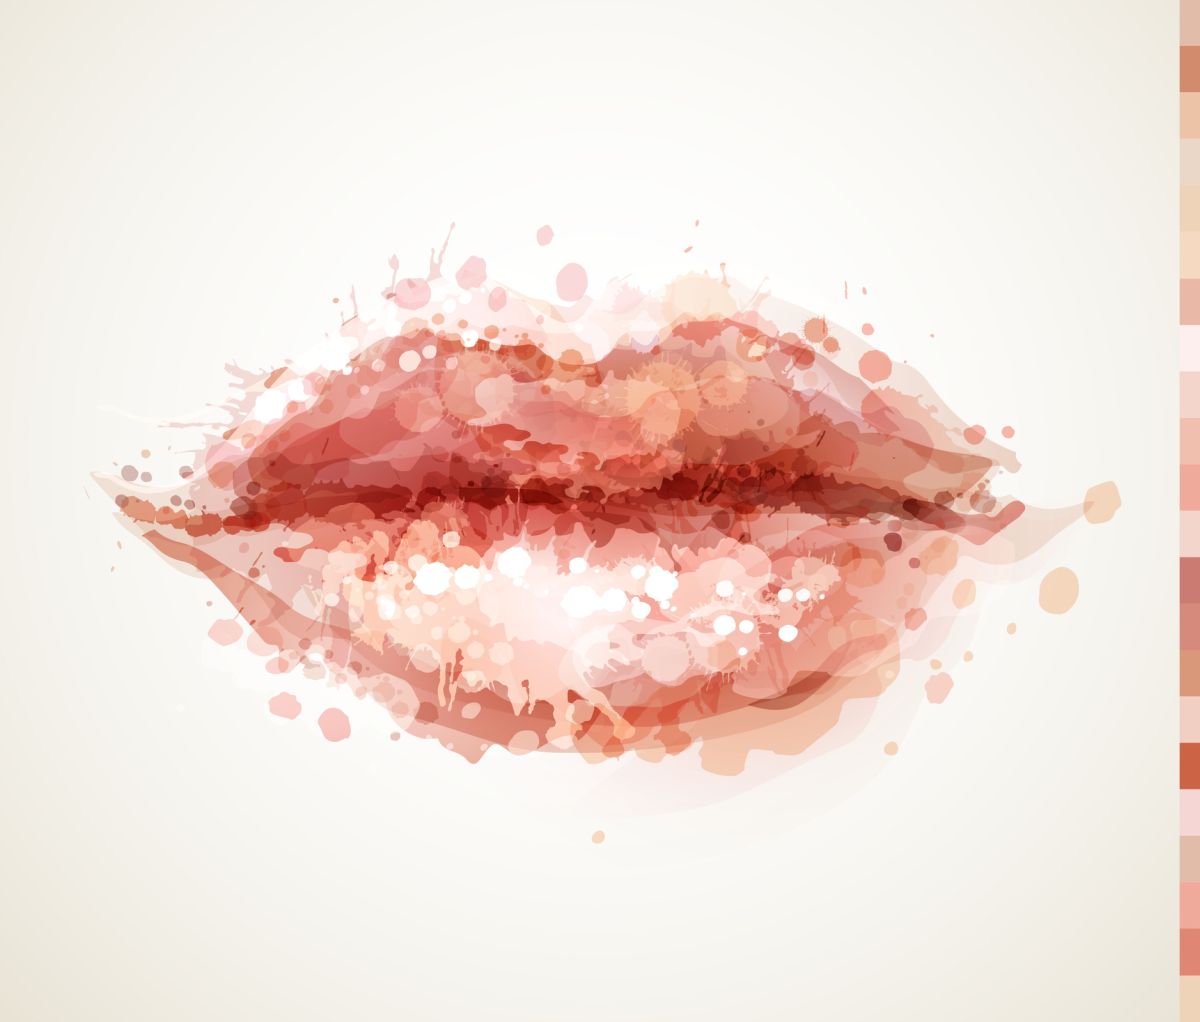 An Easy and Fun Guide on How to Draw Lips